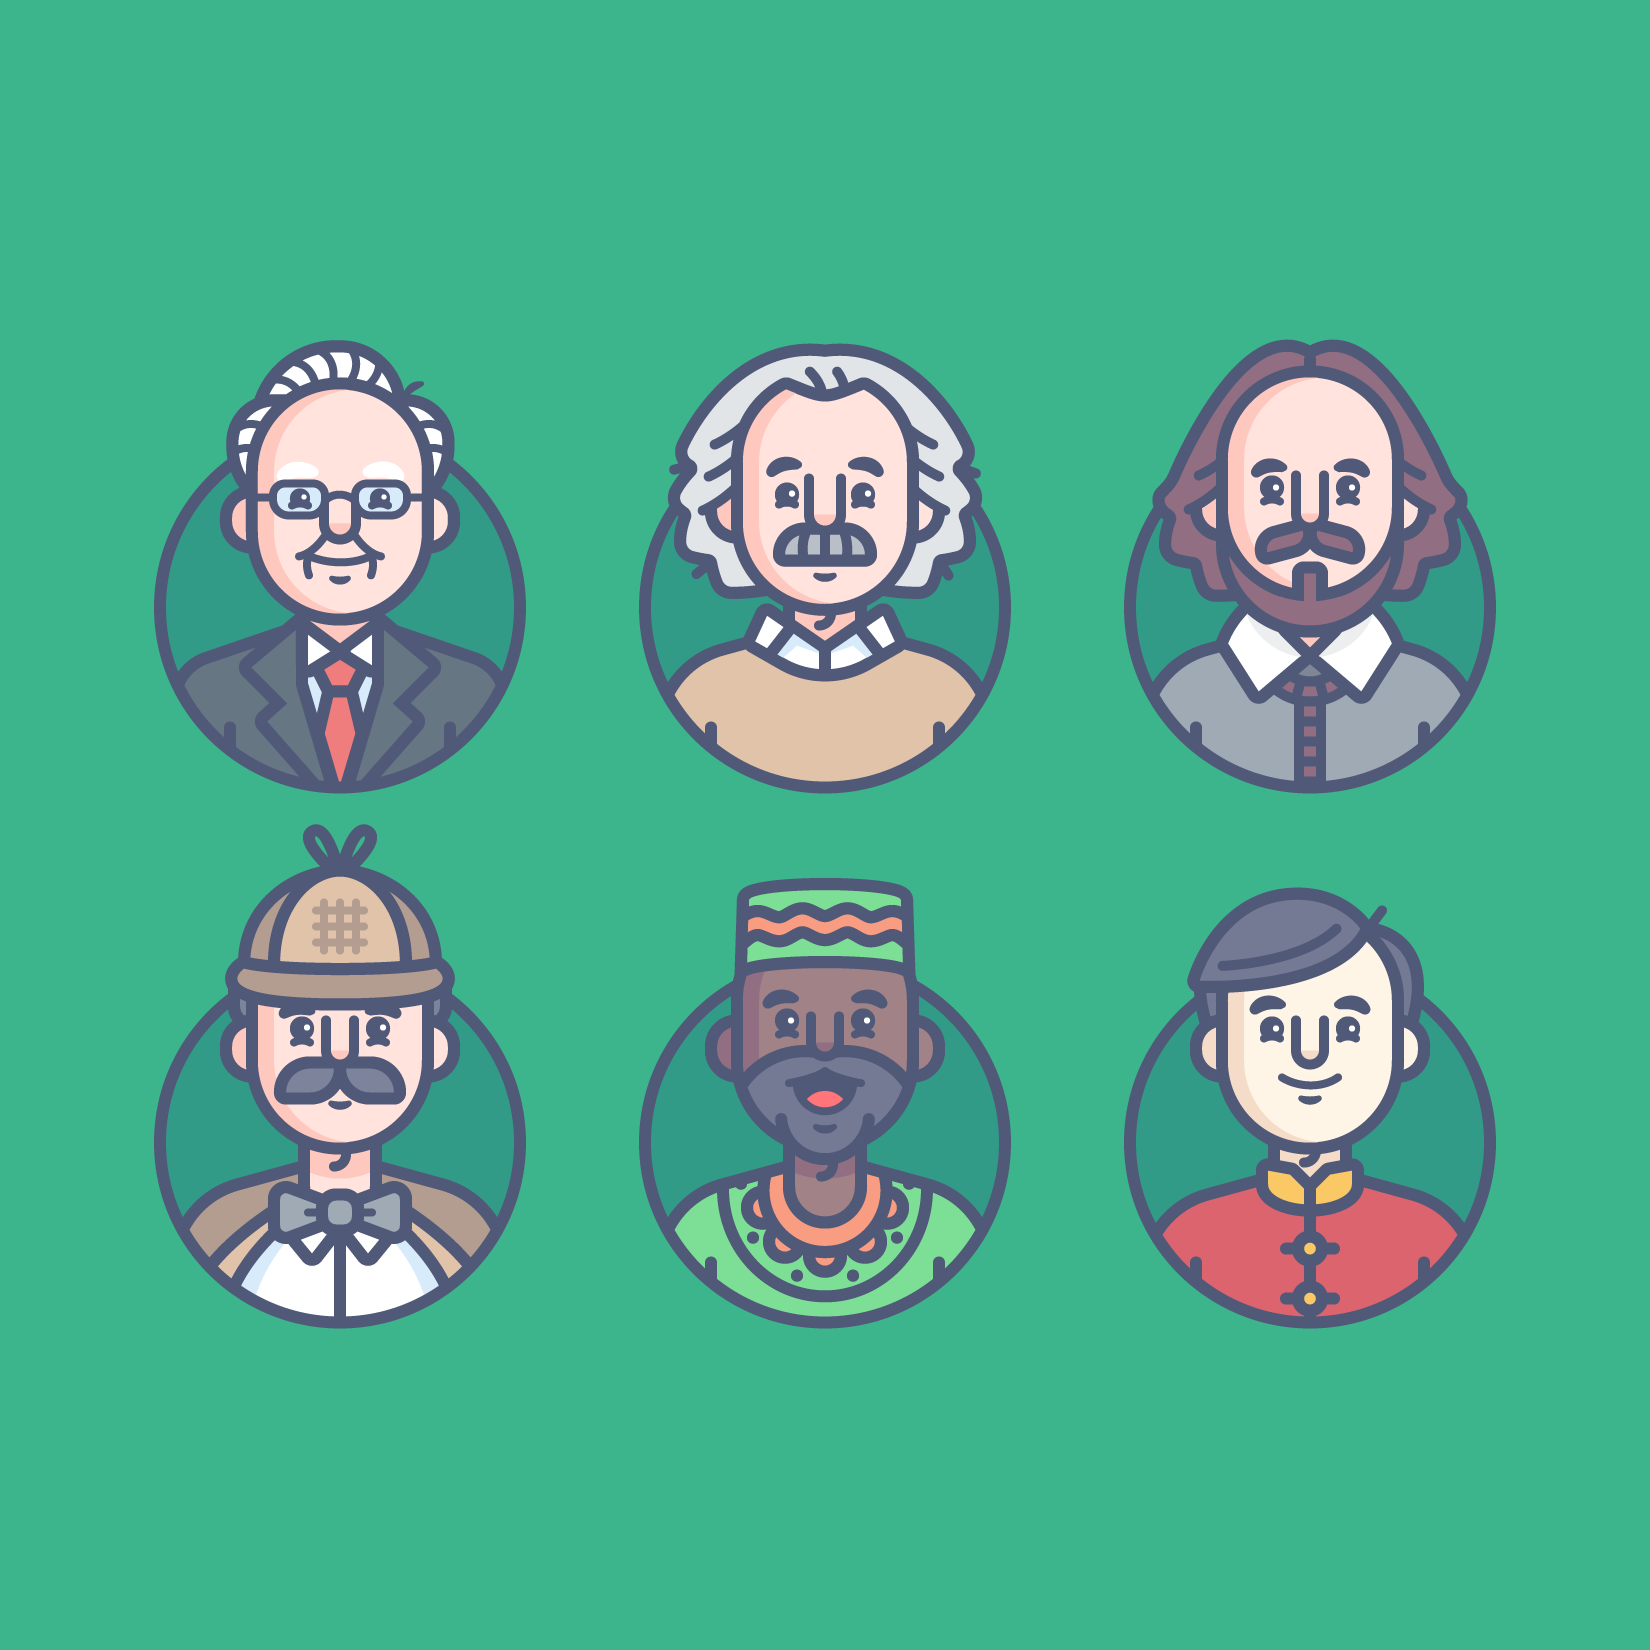 kb-characters_03_1650x1650